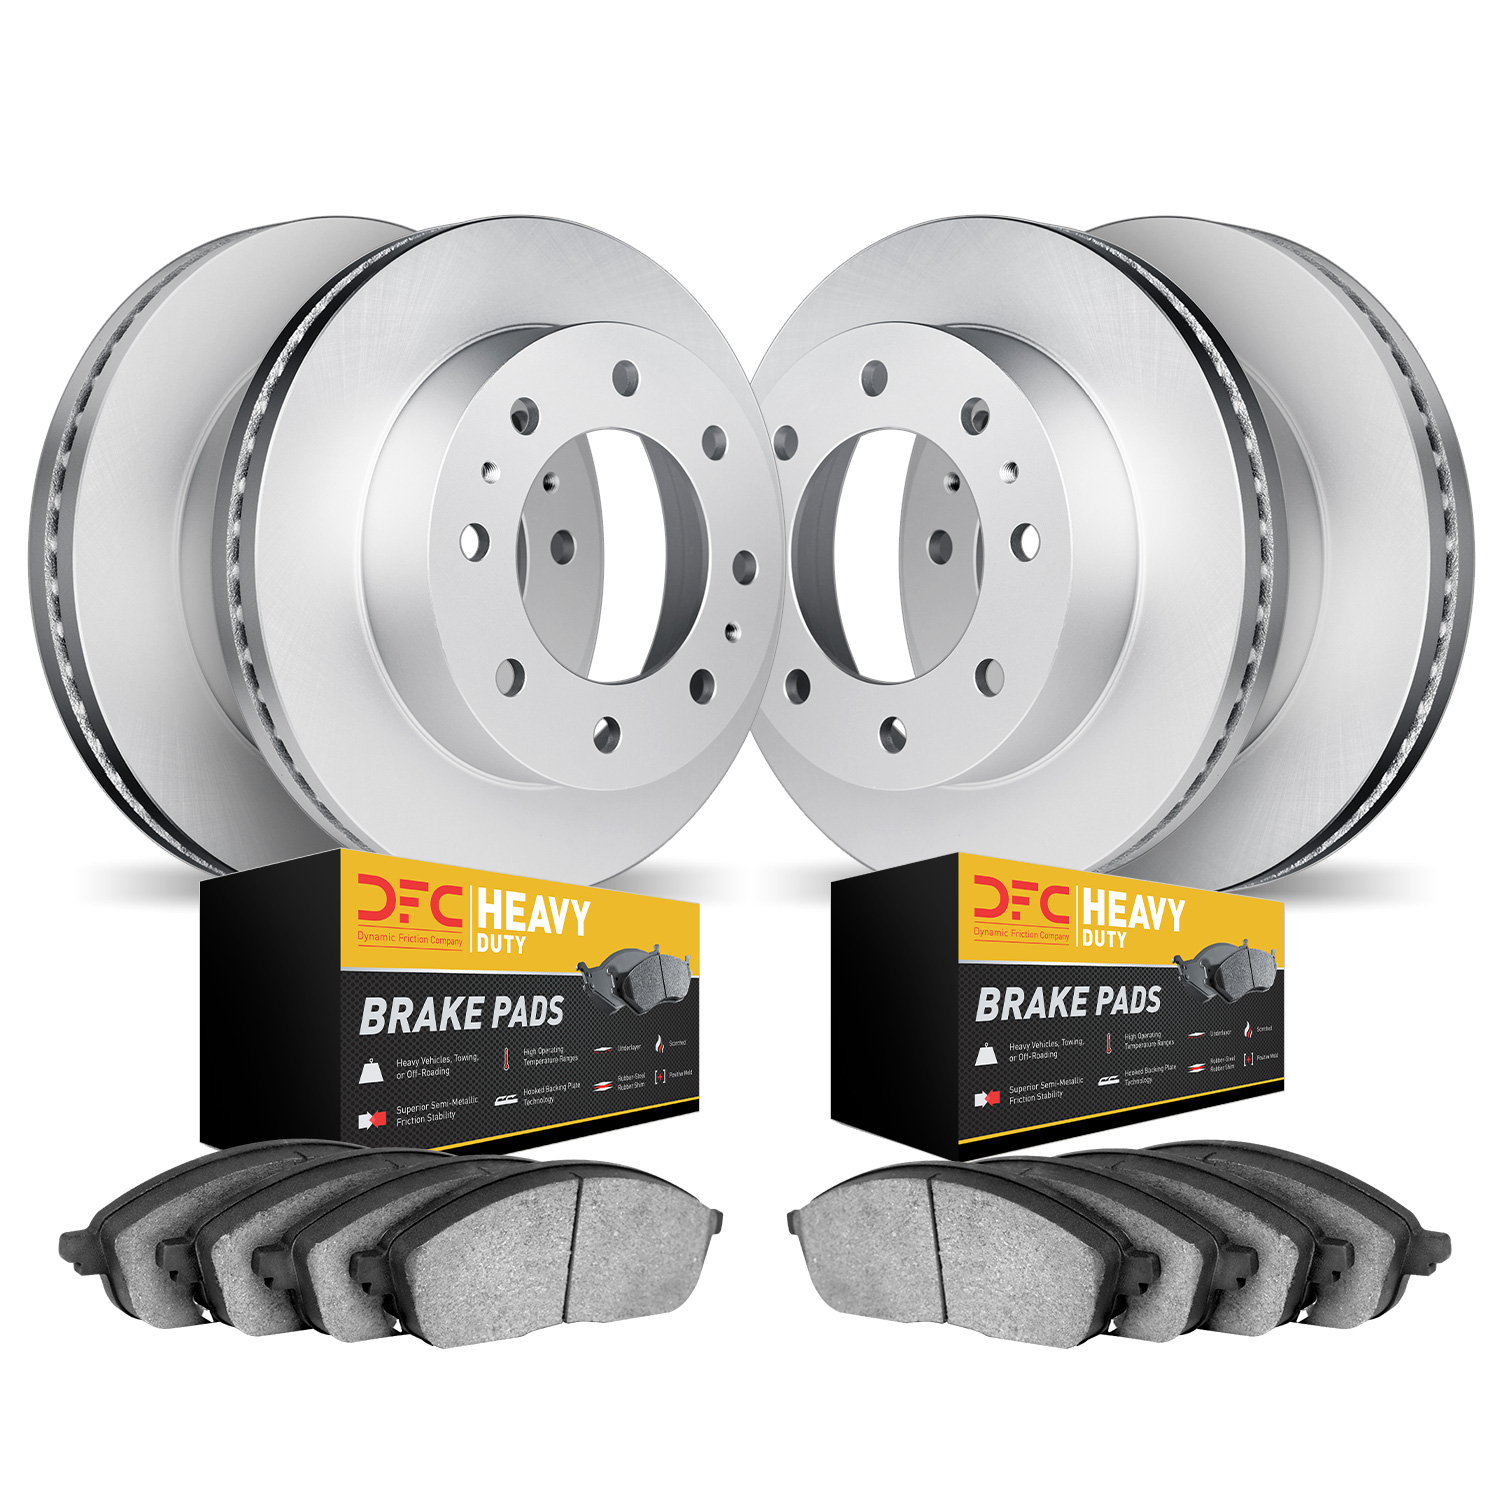 4204-54067 Geospec Brake Rotors w/Heavy-Duty Brake Pads Kit, Fits Select Ford/Lincoln/Mercury/Mazda, Position: Front and Rear